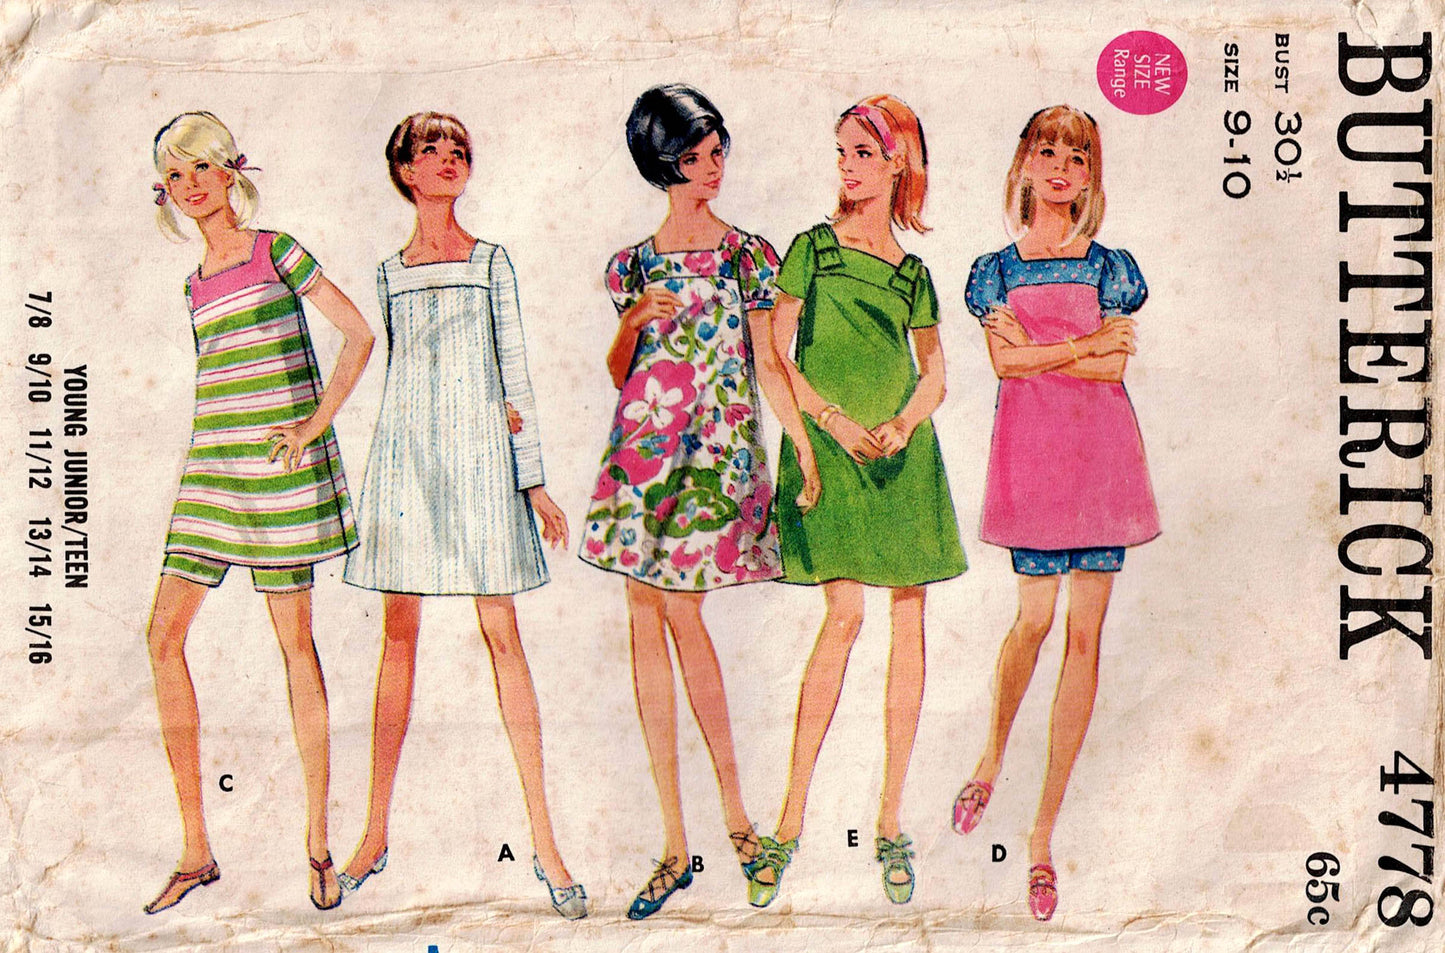 Butterick 4778 Young Junior Teens Mini Tent Dress & Shorts 1960s Vintage Sewing Pattern Size 12 Bust 30.5 inches